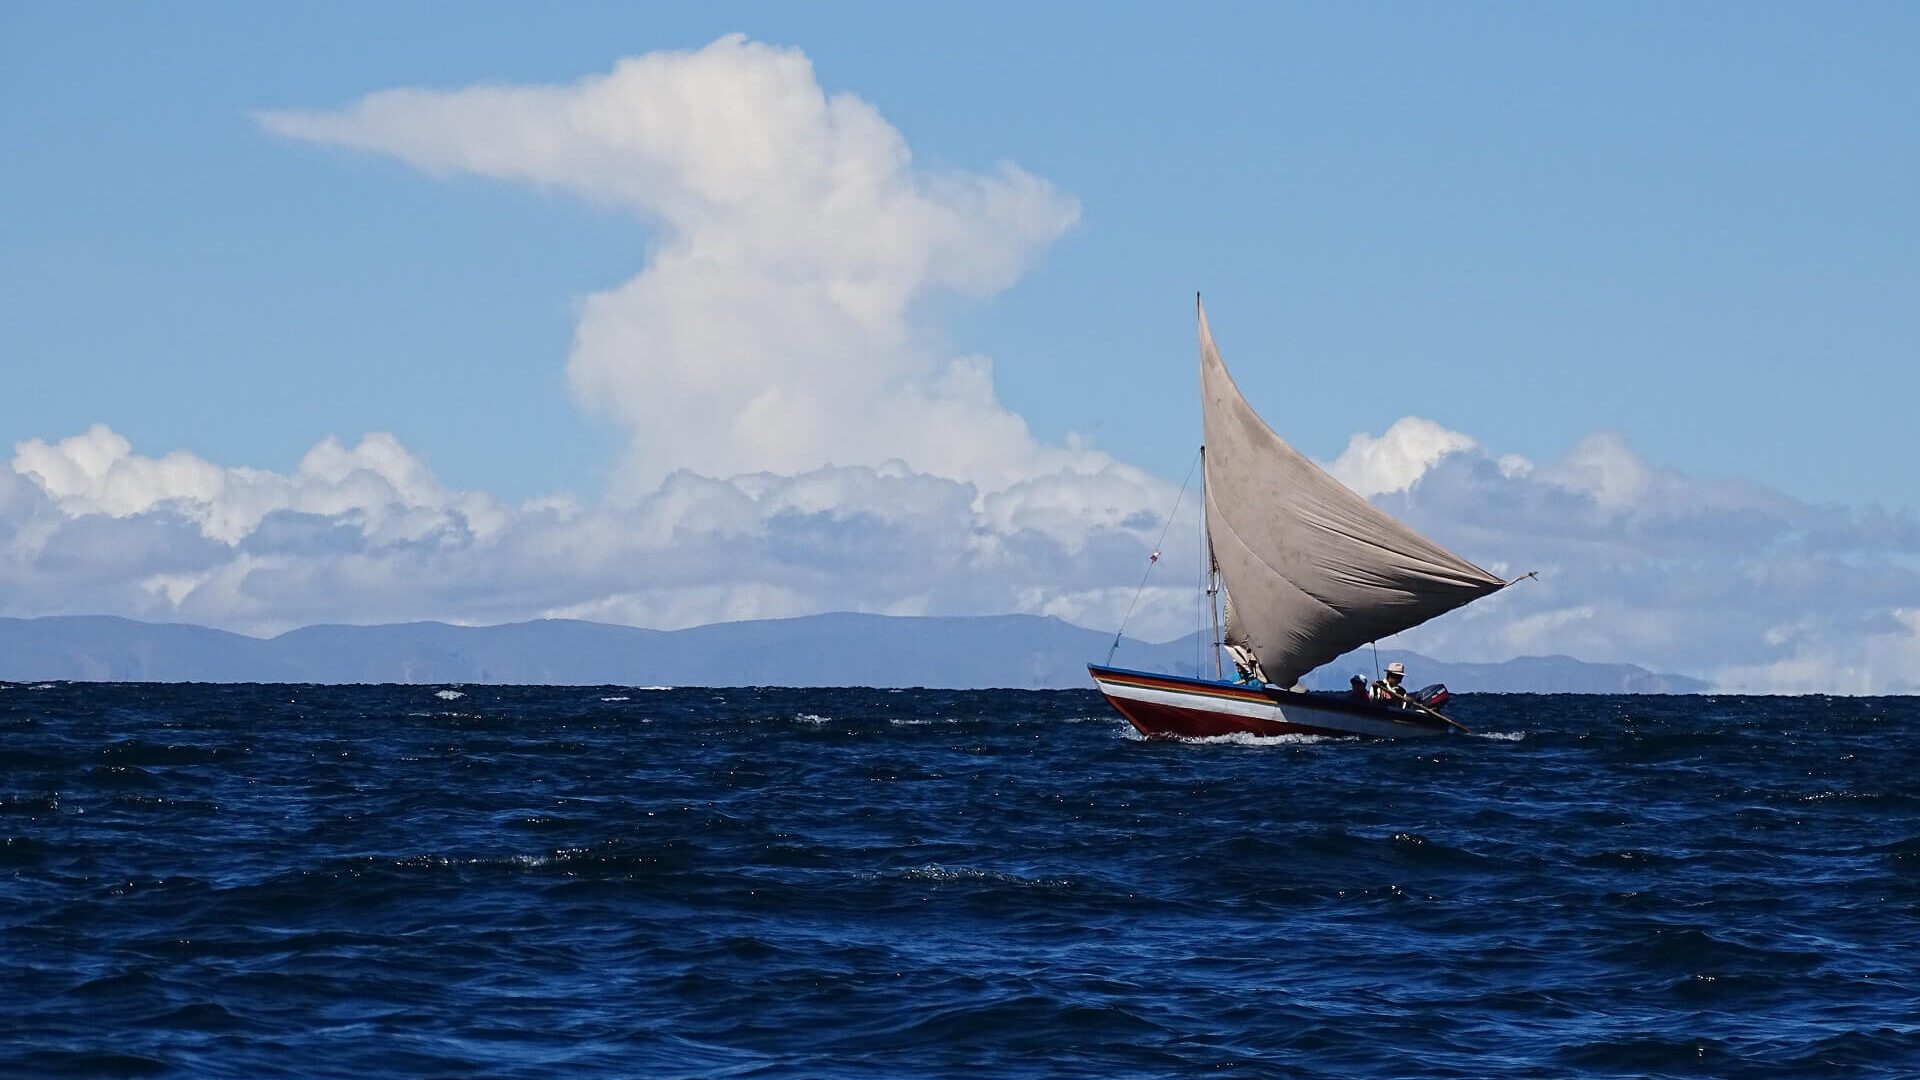 Sailing the waters of Lake Titicaca in a traditional sailboat with RESPONSible Travel Peru